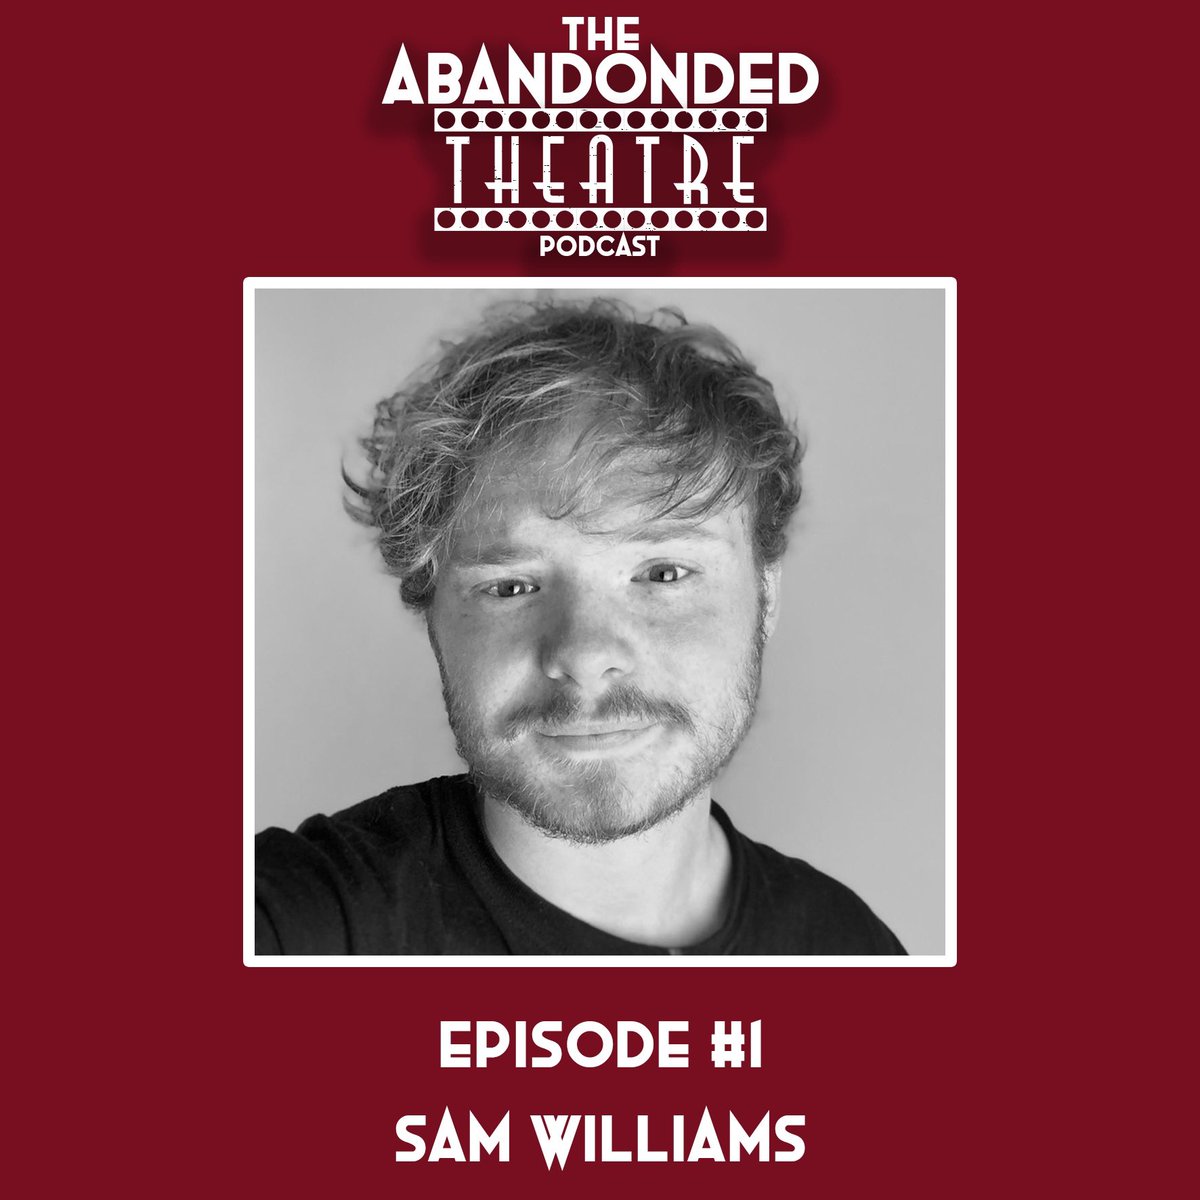 EPISODE 1 - SAM WILLIAMS The first episode of The Abandoned Theatre podcast is out tomorrow. Our first ever guest is Tiktokker and social media star, Sam Williams (@smow123) Tune in tomorrow to see what shows Sam picks as he programmes the premier season at The Abandoned Theatre